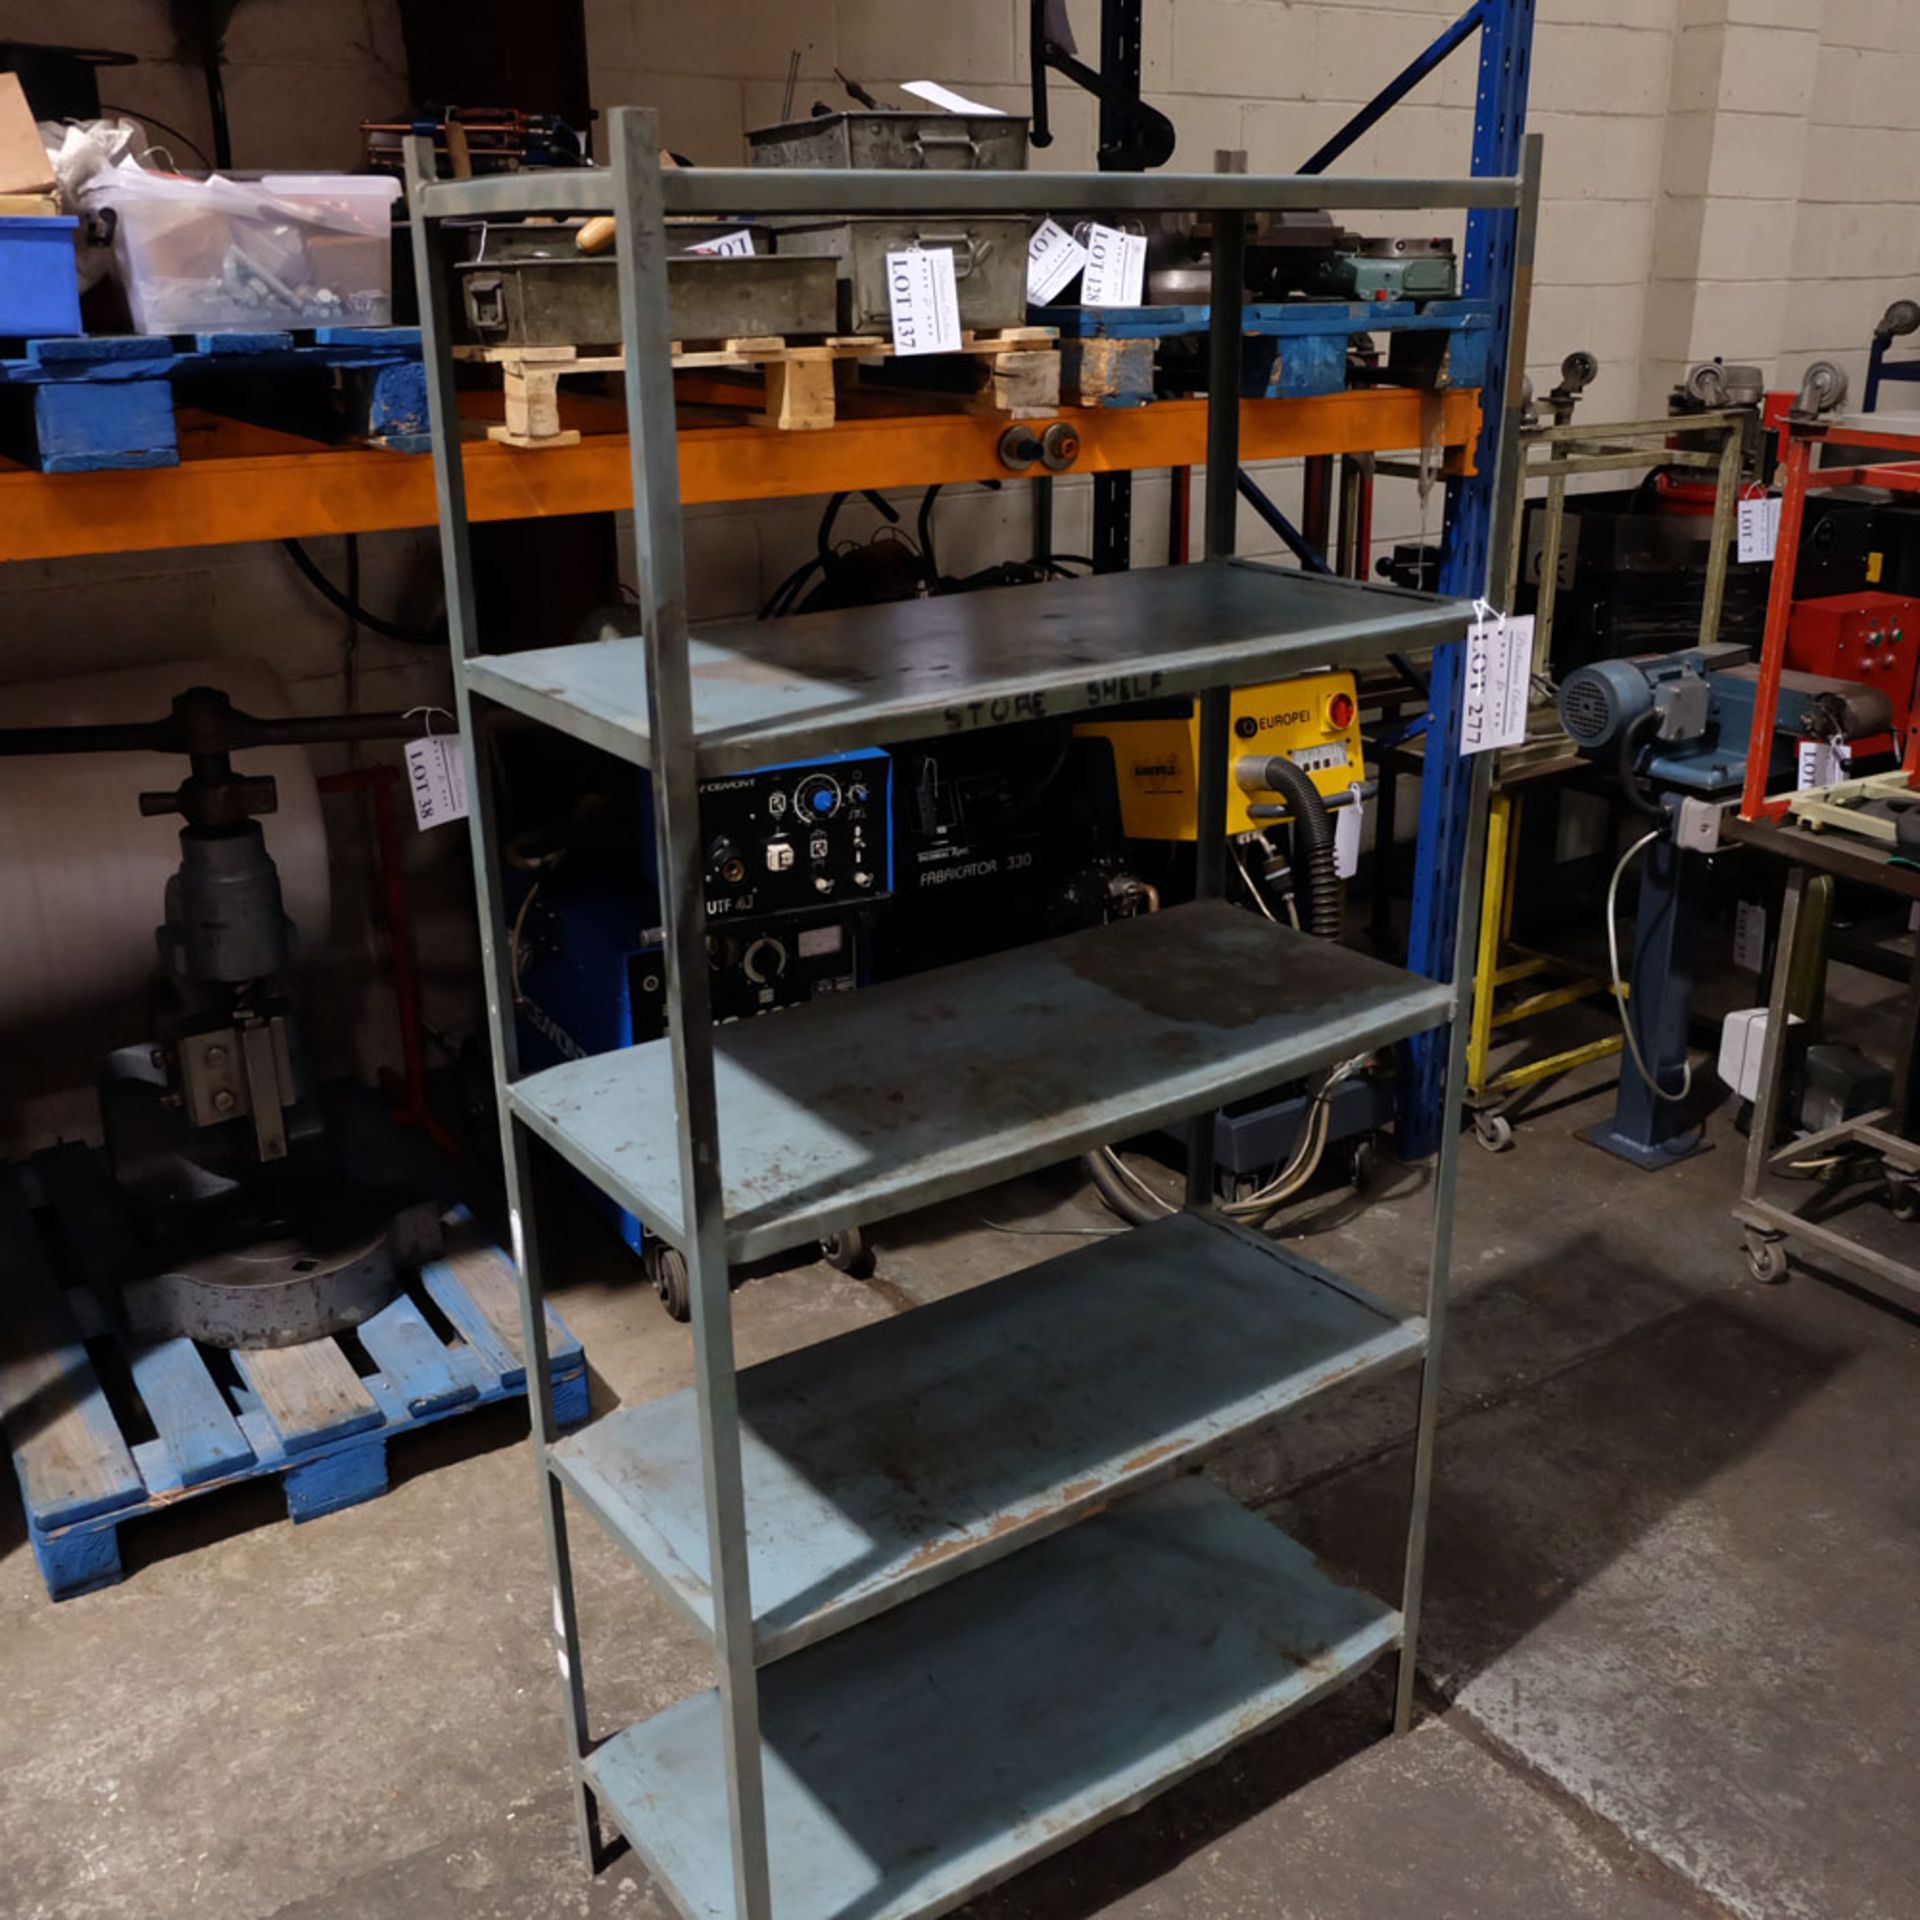 Steel Shelves. Shelf Size Approx 36" x 16". Overall Height 72". - Image 2 of 5